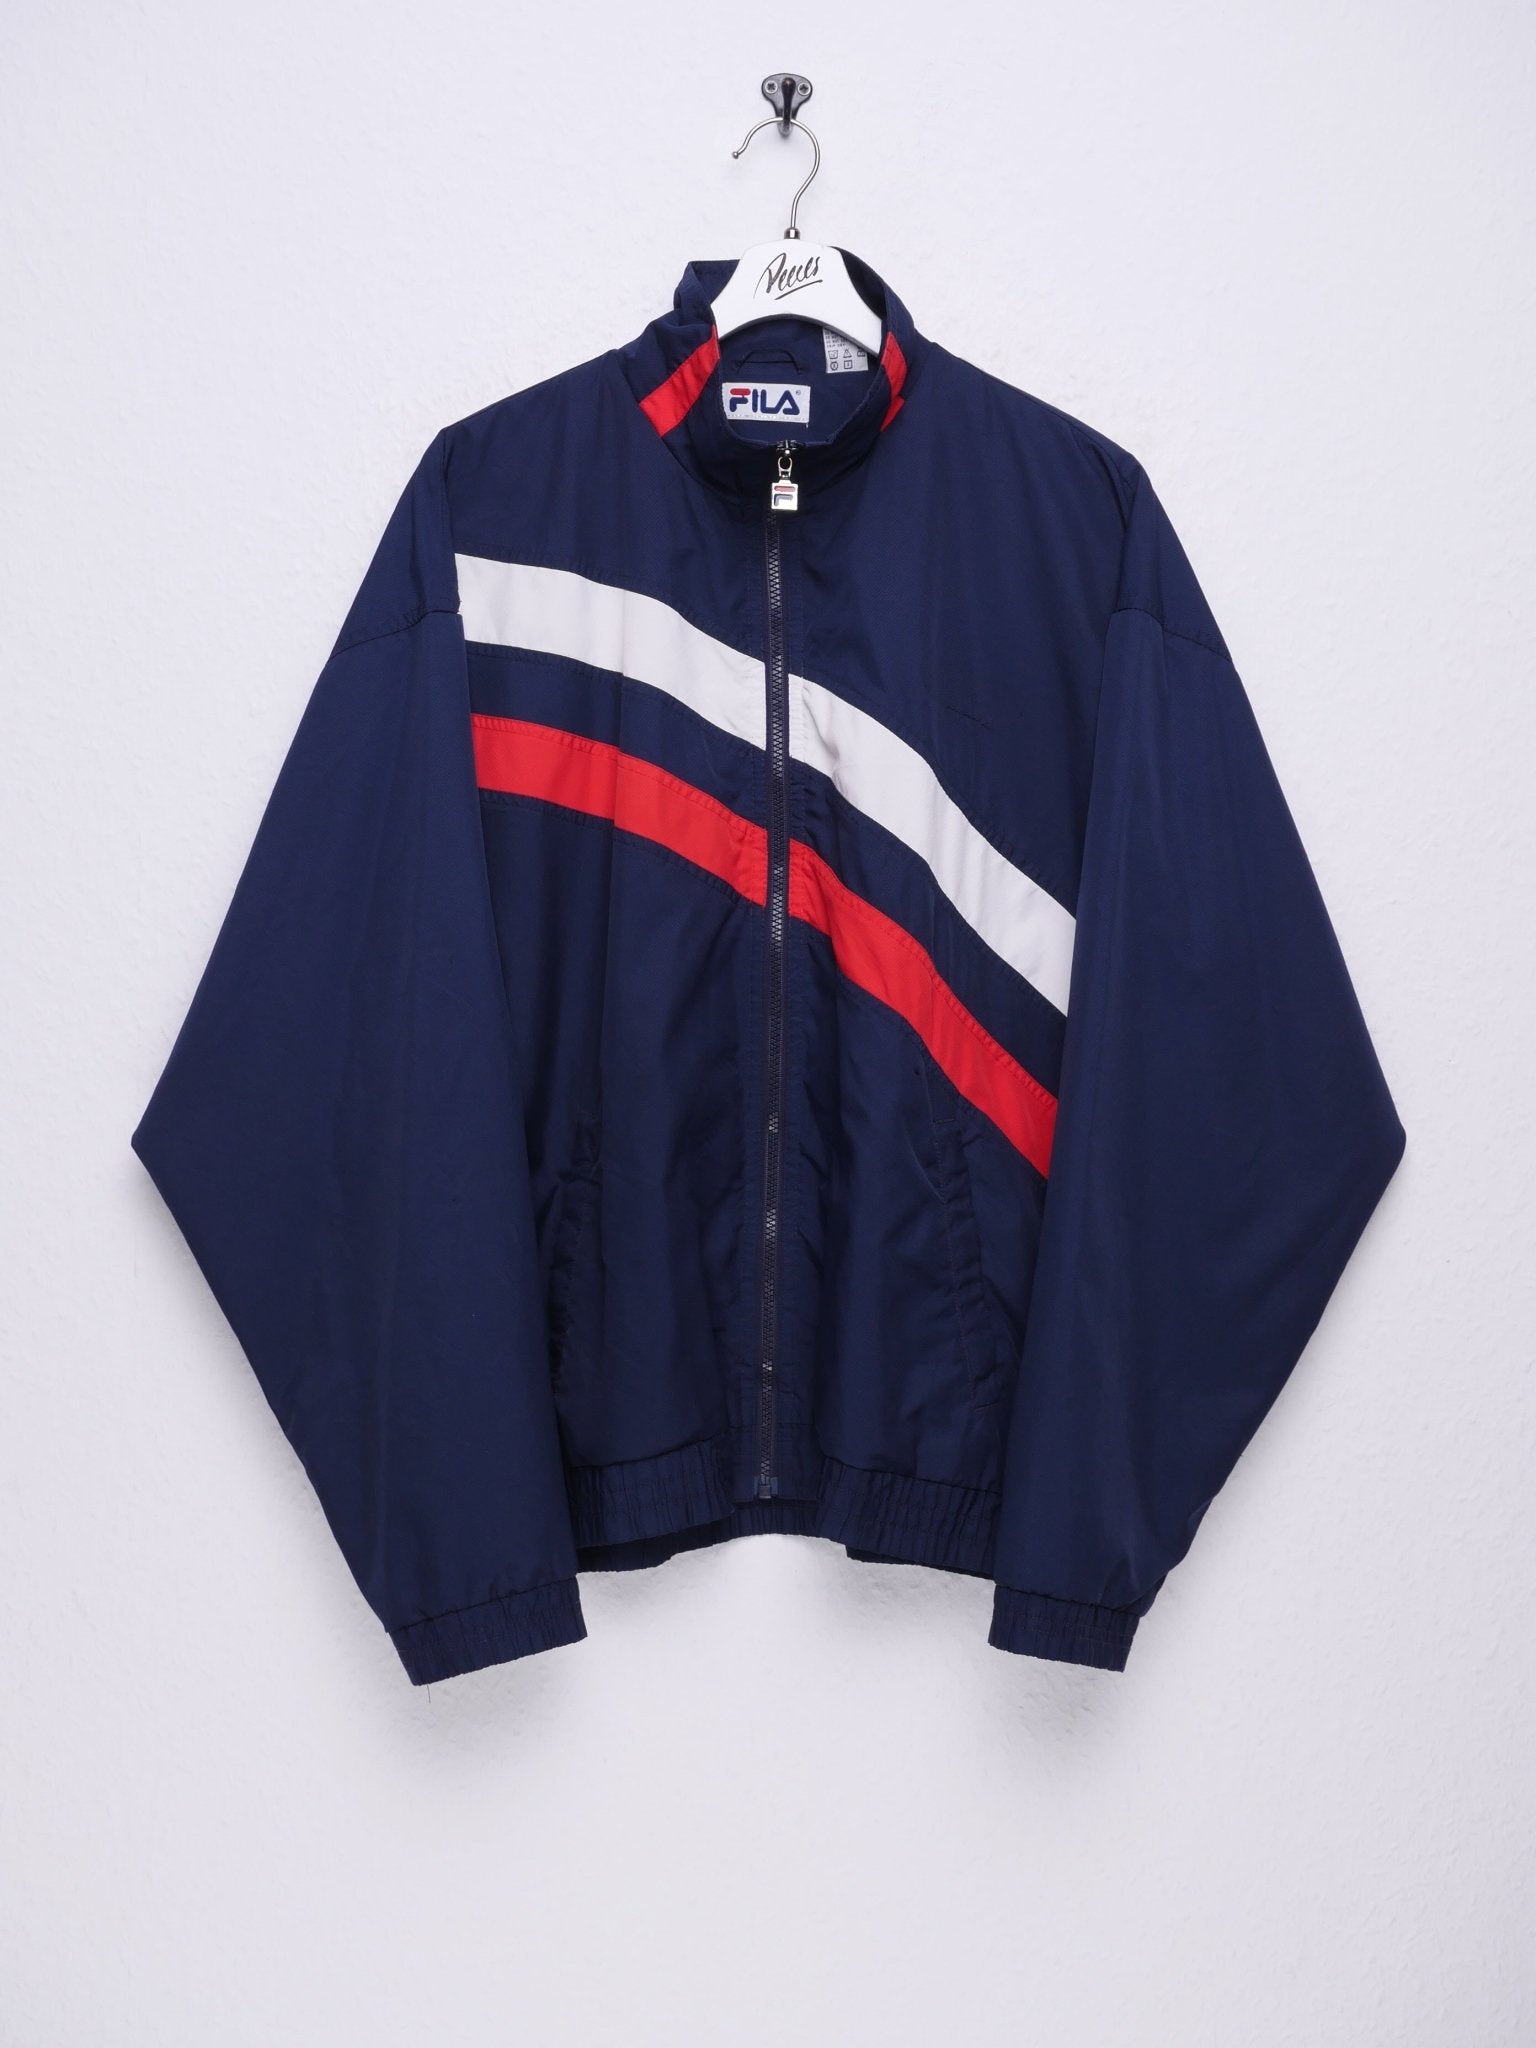 Fila embroidered Spellout Vintage Track Jacke - Peeces